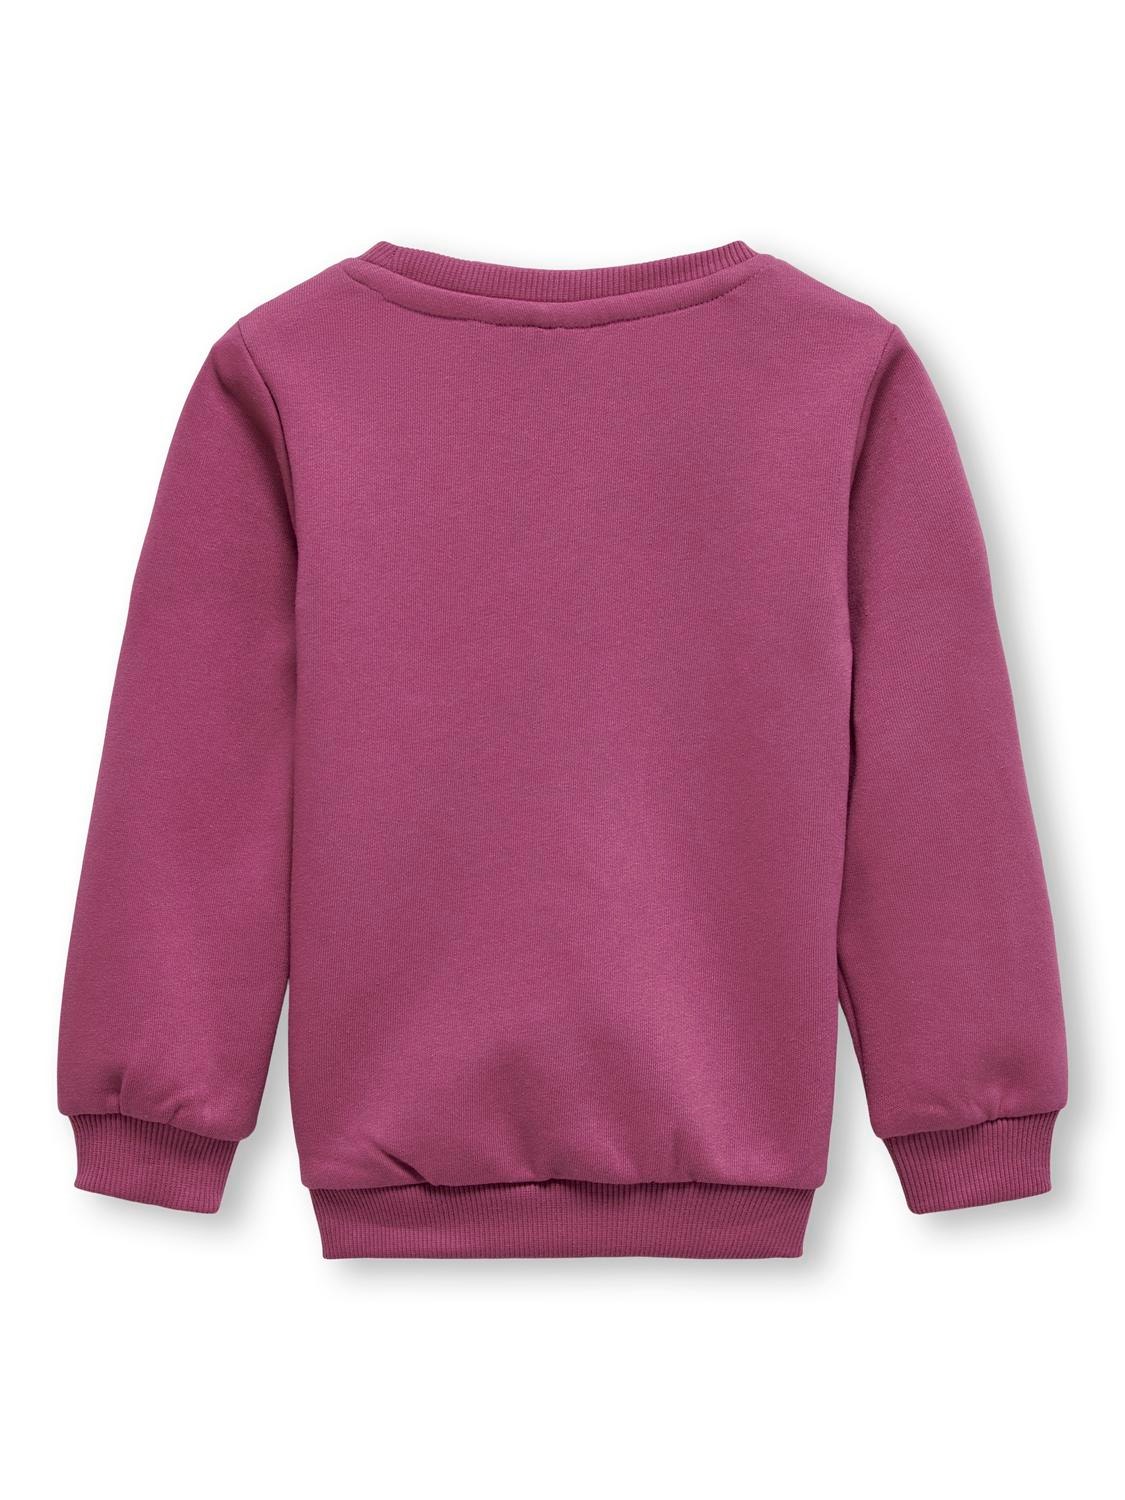 ONLY Mini sweatshirt with frontprint -Red Violet - 15303309